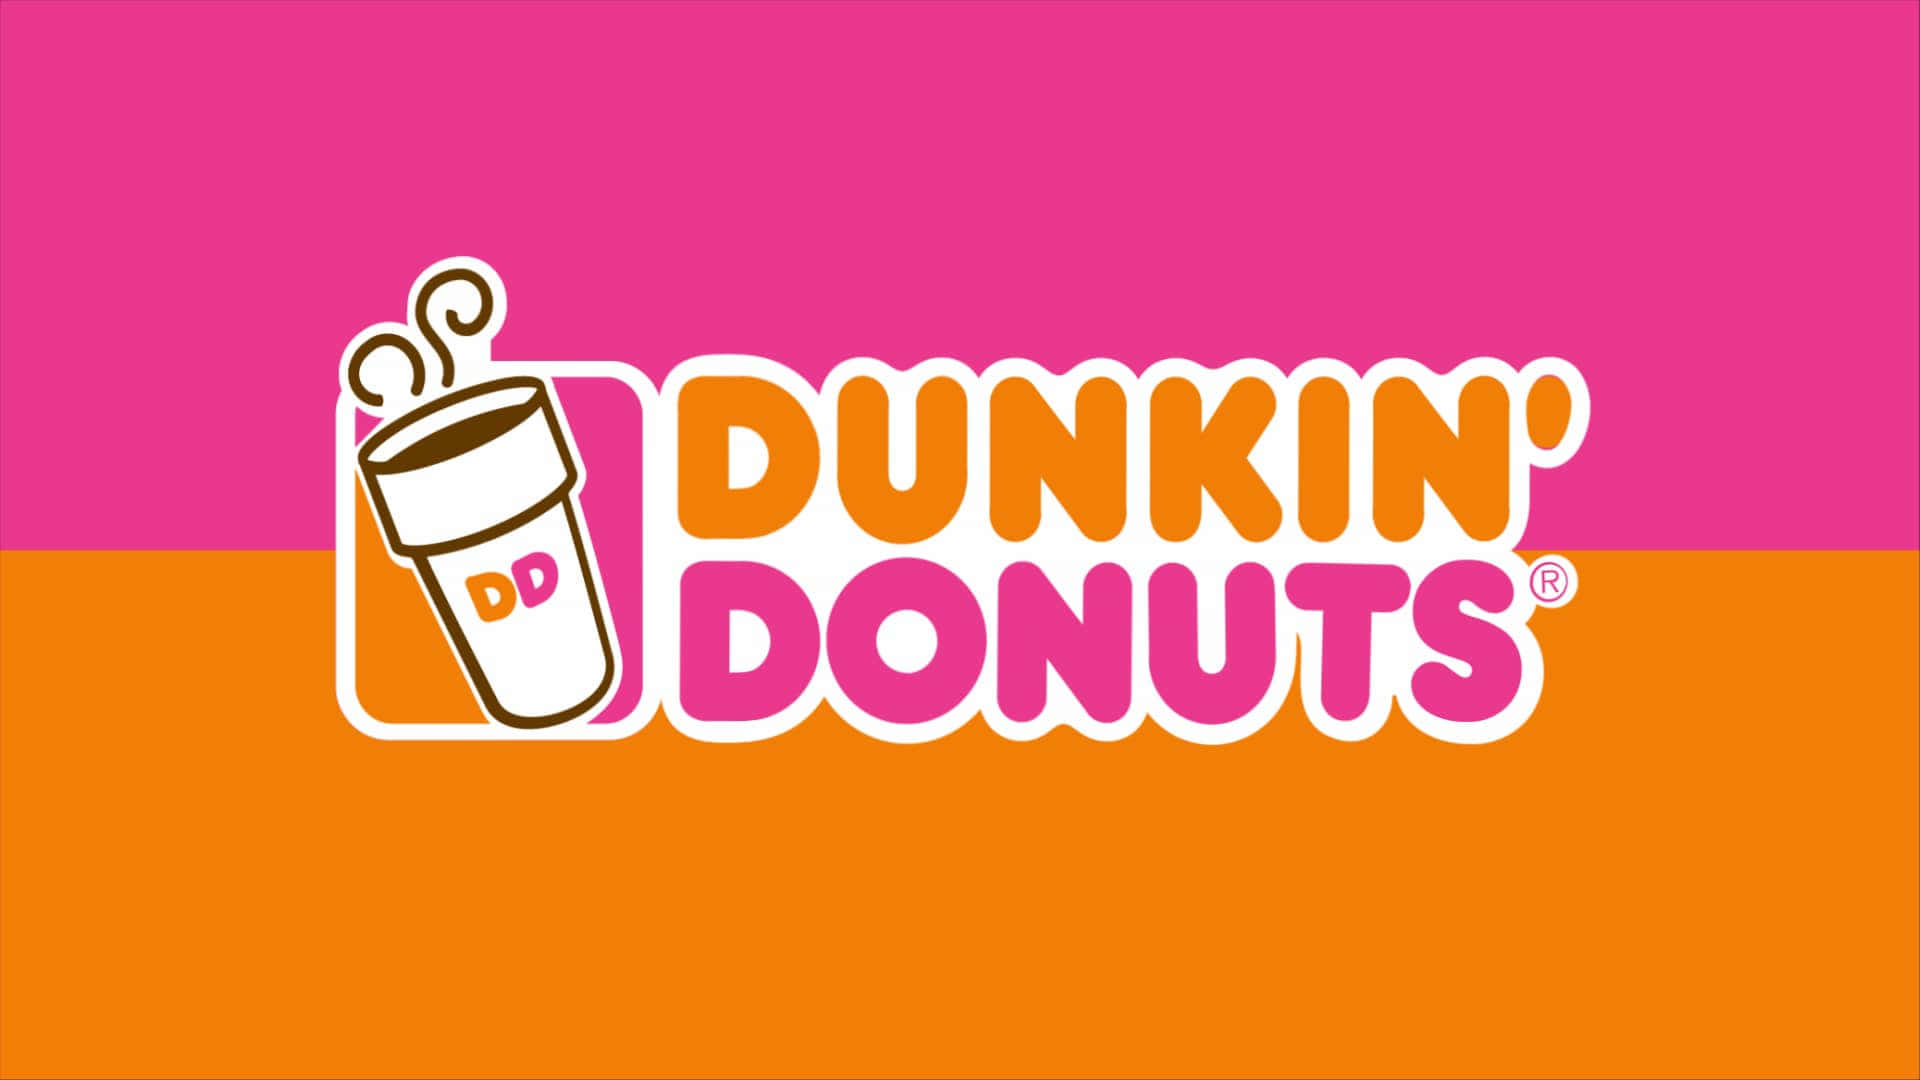 Enjoy Dunkin' Donuts Coffee anytime.